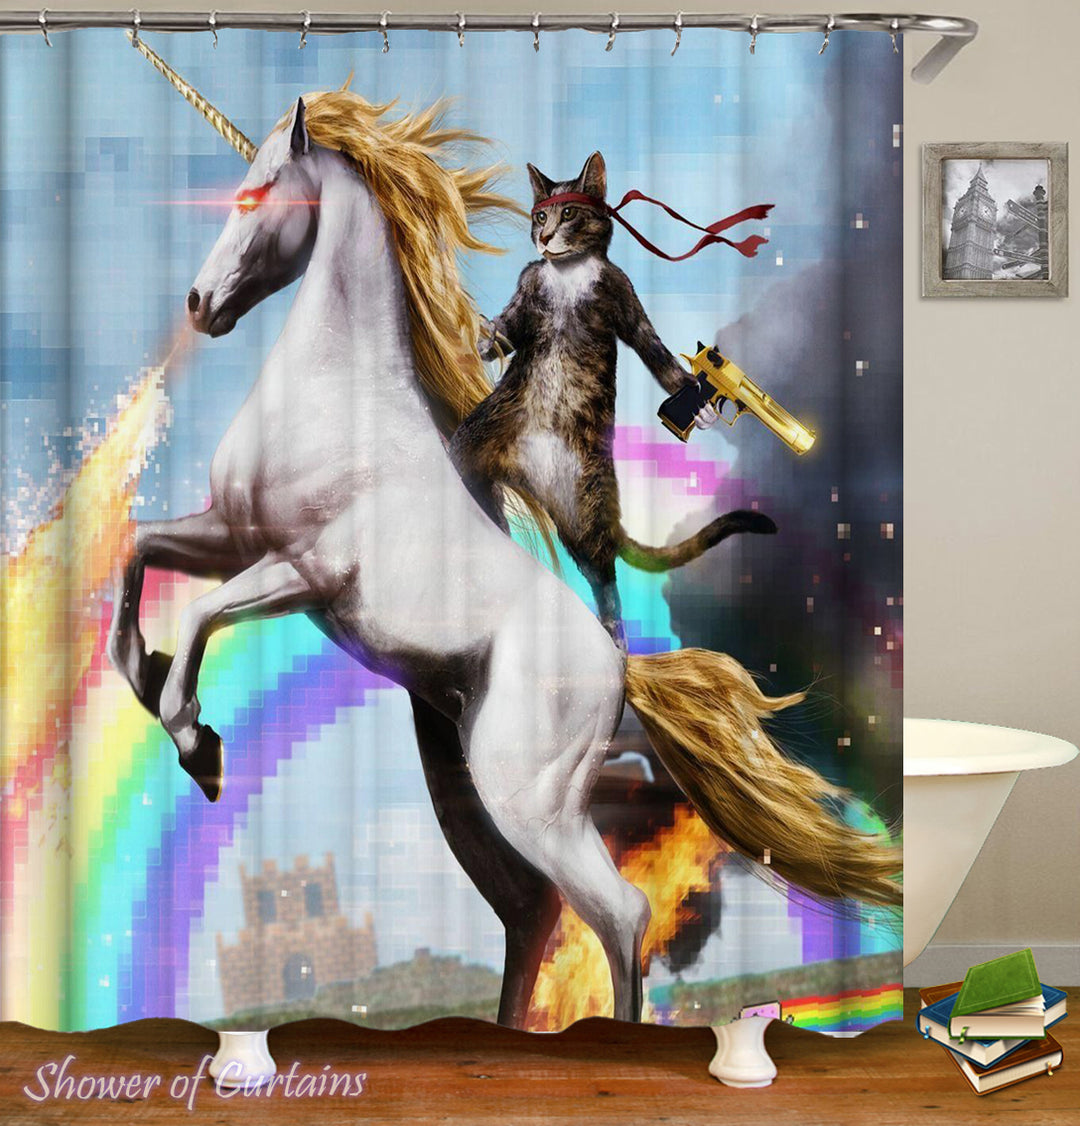 Ridiculous shower curtains of Cat Riding A Unicorn